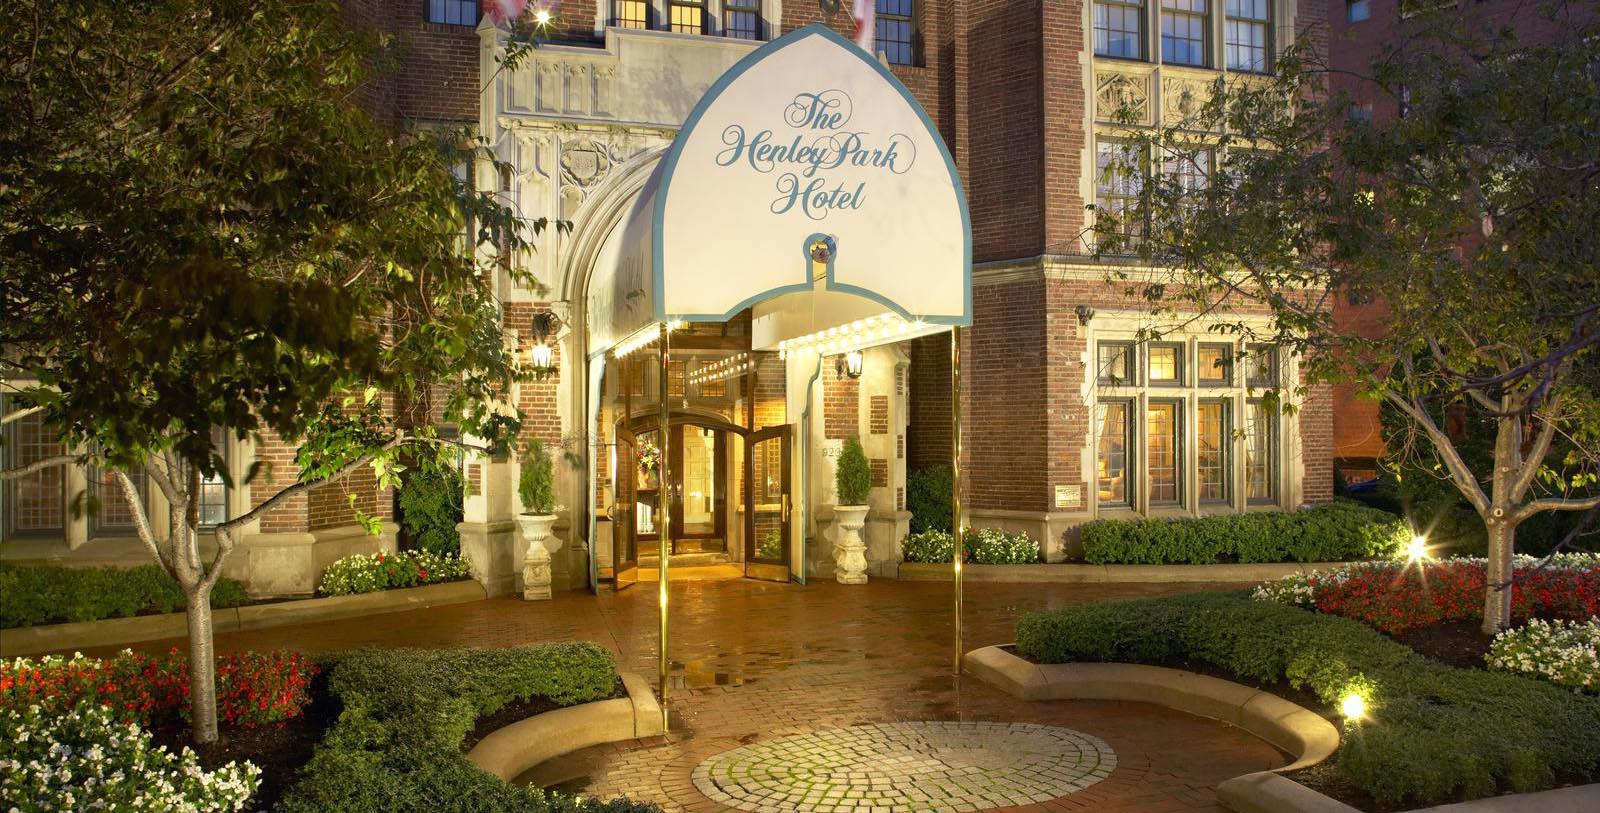 Image of Entrance The Henley Park Hotel, 1948, Member of Historic Hotels of America, in Washington, DC, Overview